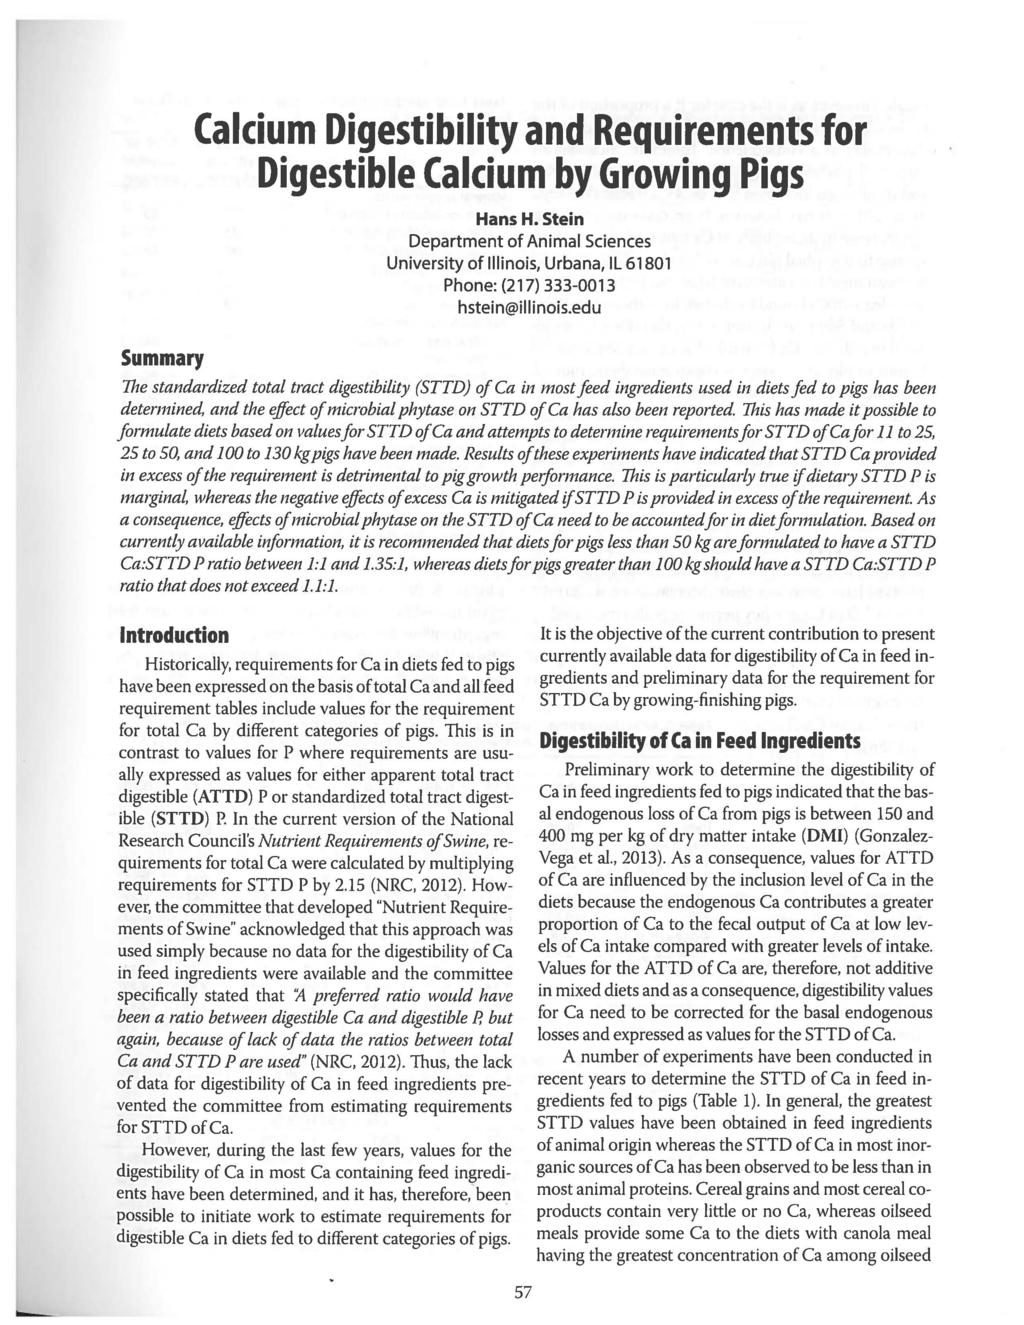 Calcium Digestibility and Requirements for Digestible Calcium by Growing Pigs Hans H.